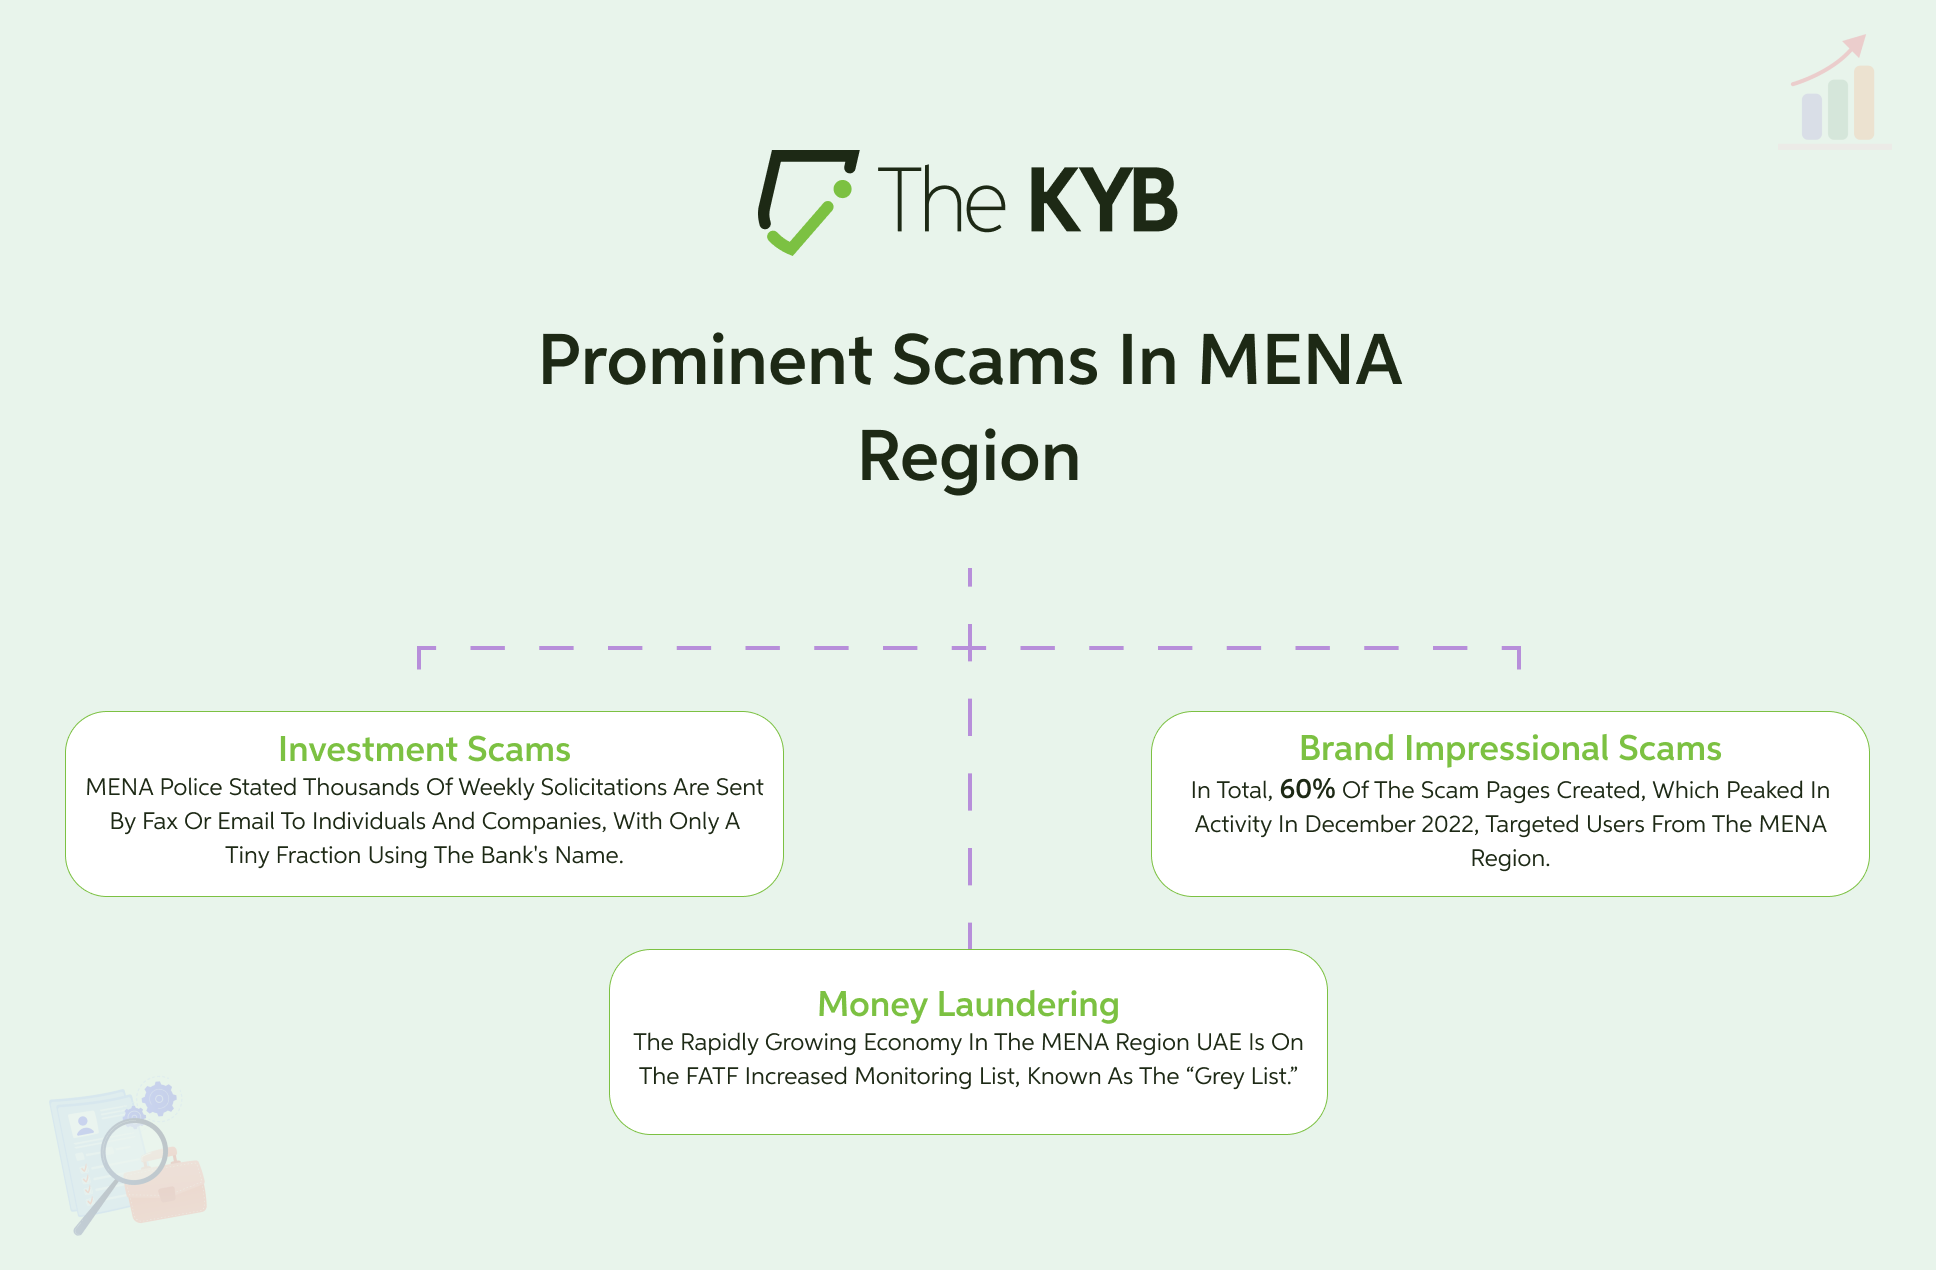 Prominent Scams In MENA Region